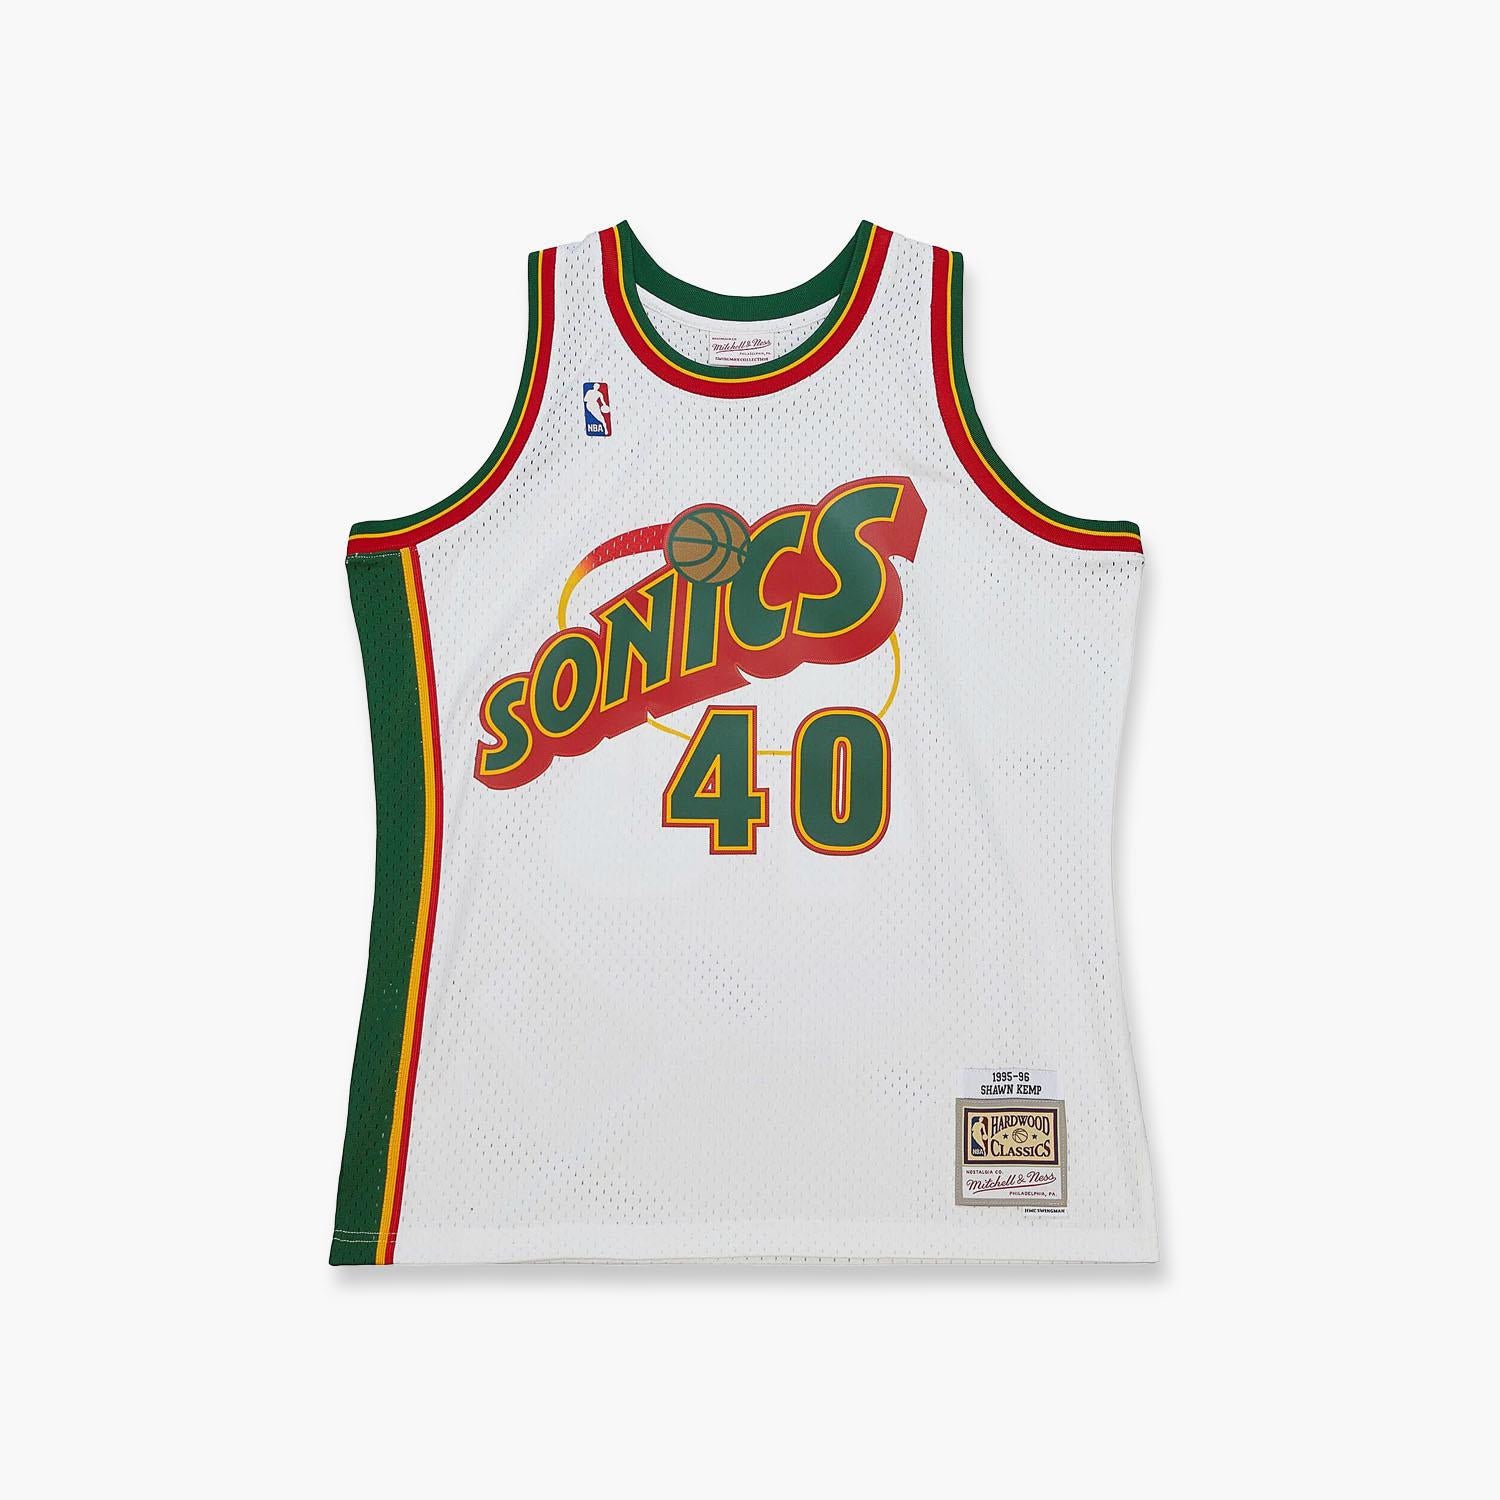 New Hardwood Classics Knicks jerseys are now available online